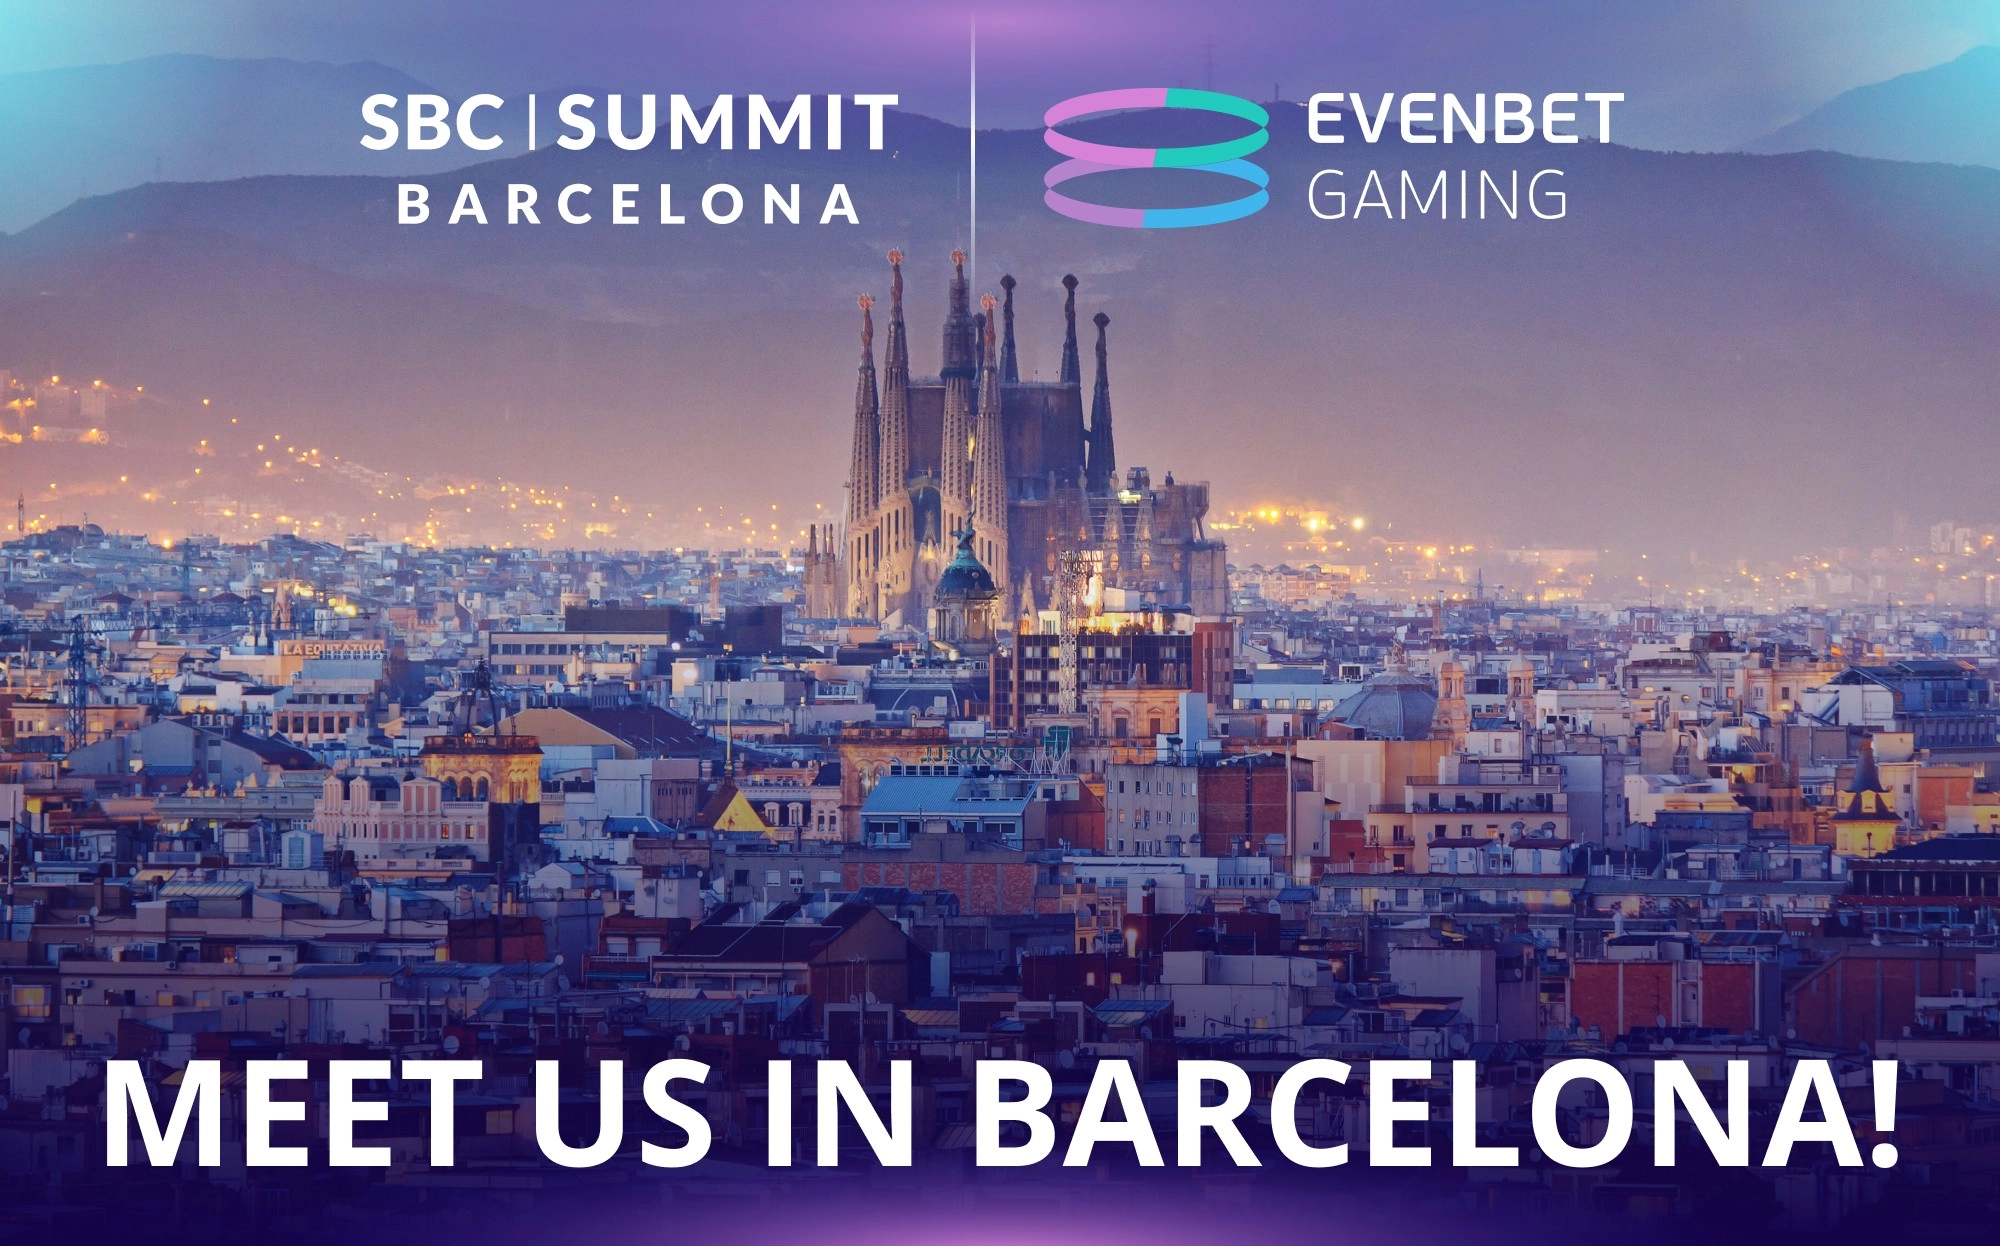 EvenBet is Exhibiting at SBC Barcelona on September 19-21!